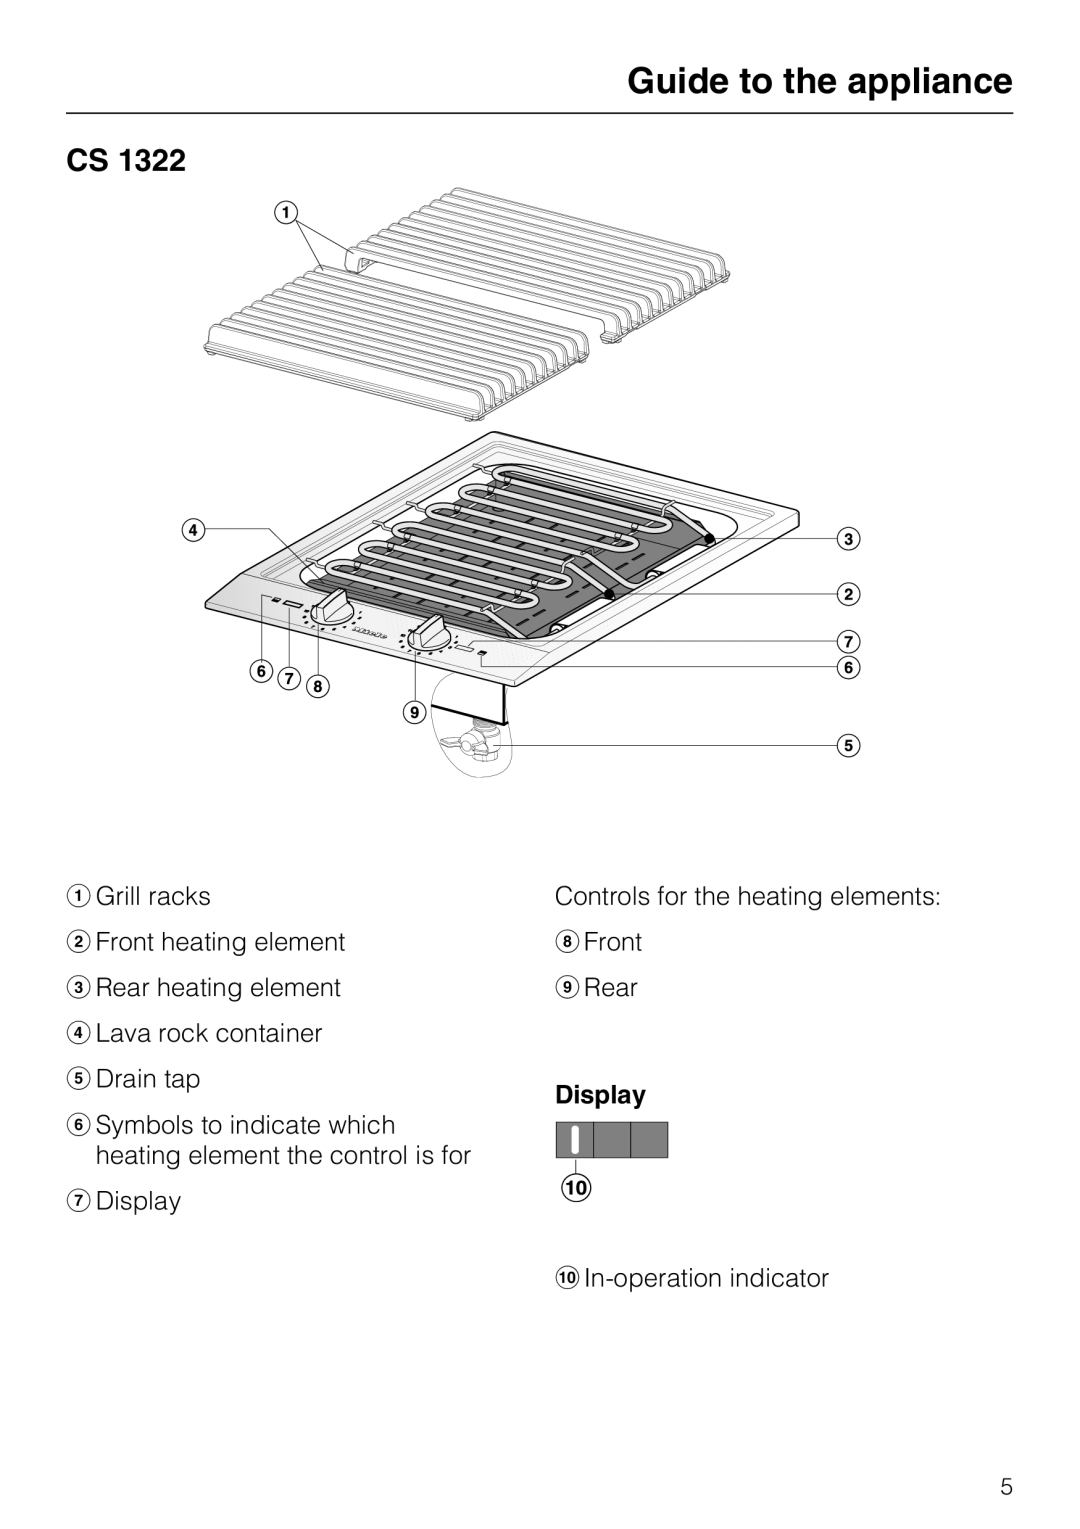 Miele CS1312, CS1322 installation instructions Guide to the appliance, a Grill racks, Display 